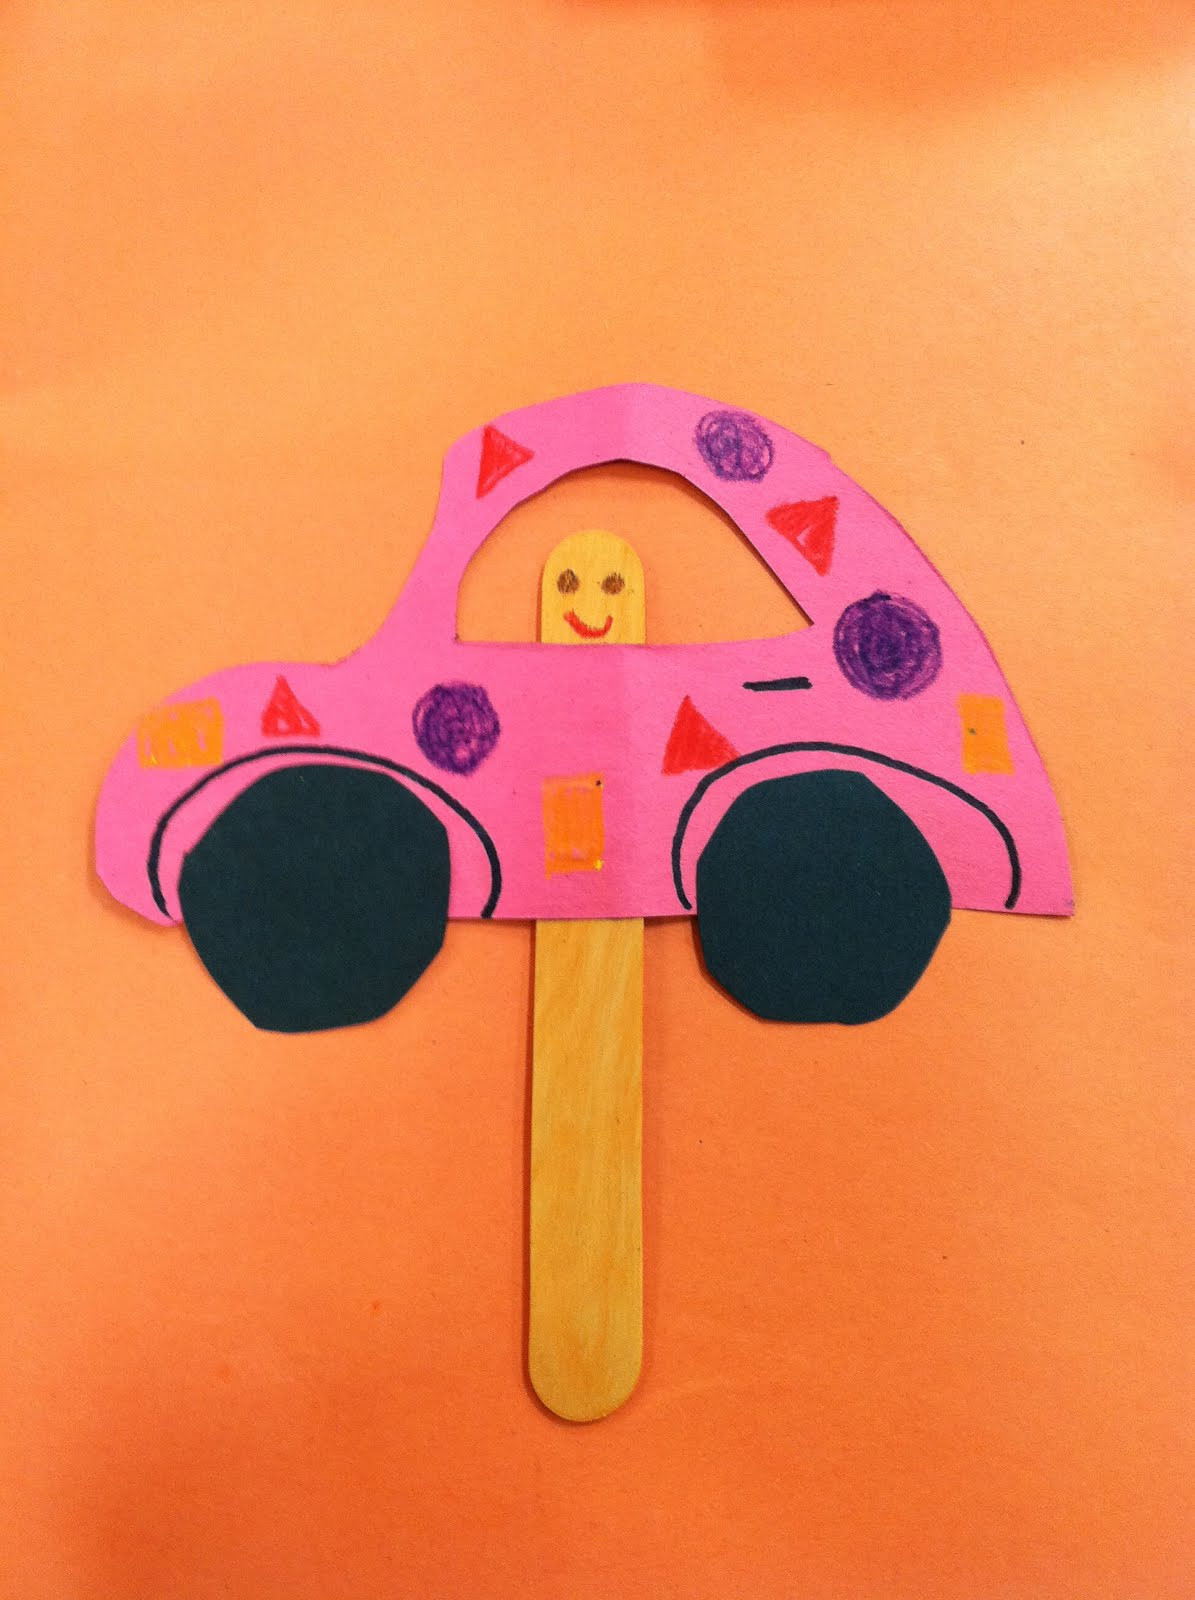 Arts And Crafts For Preschool
 In the Children s Room Theme Thursday Cars Cars Cars